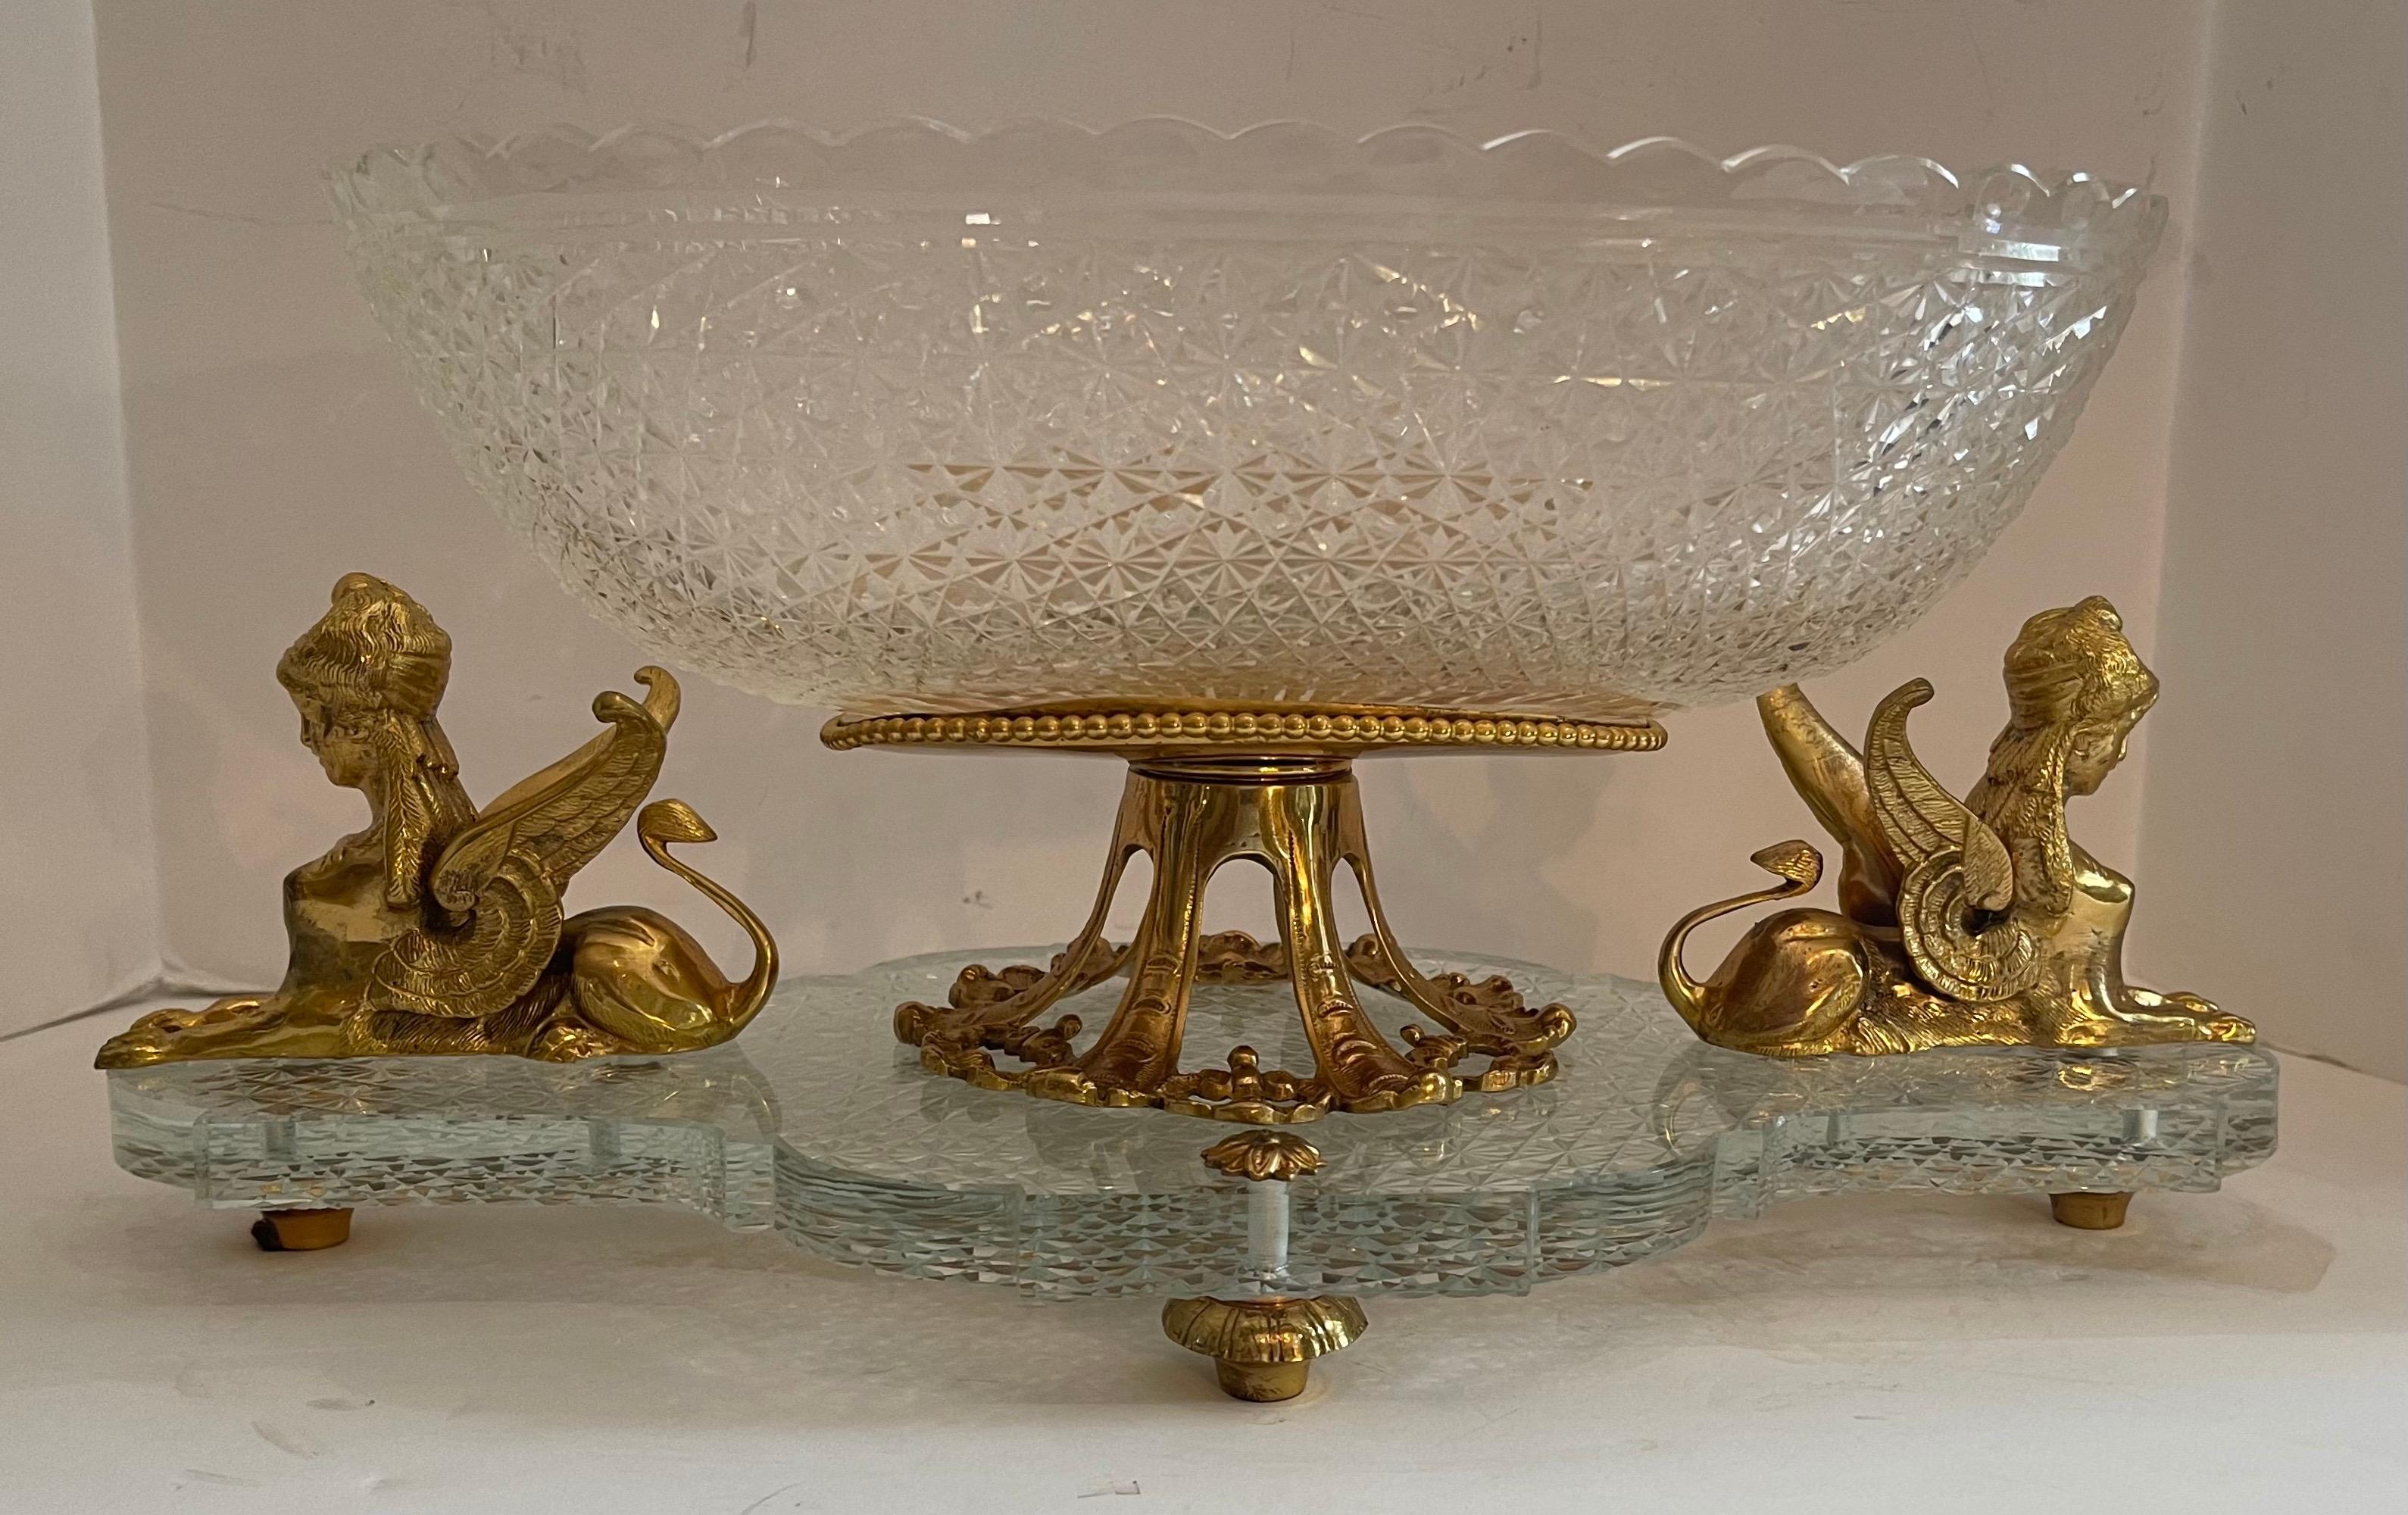 Faceted Wonderful French Empire Ormolu Bronze Sphinx Oval Cut Crystal Centerpiece Bowl For Sale